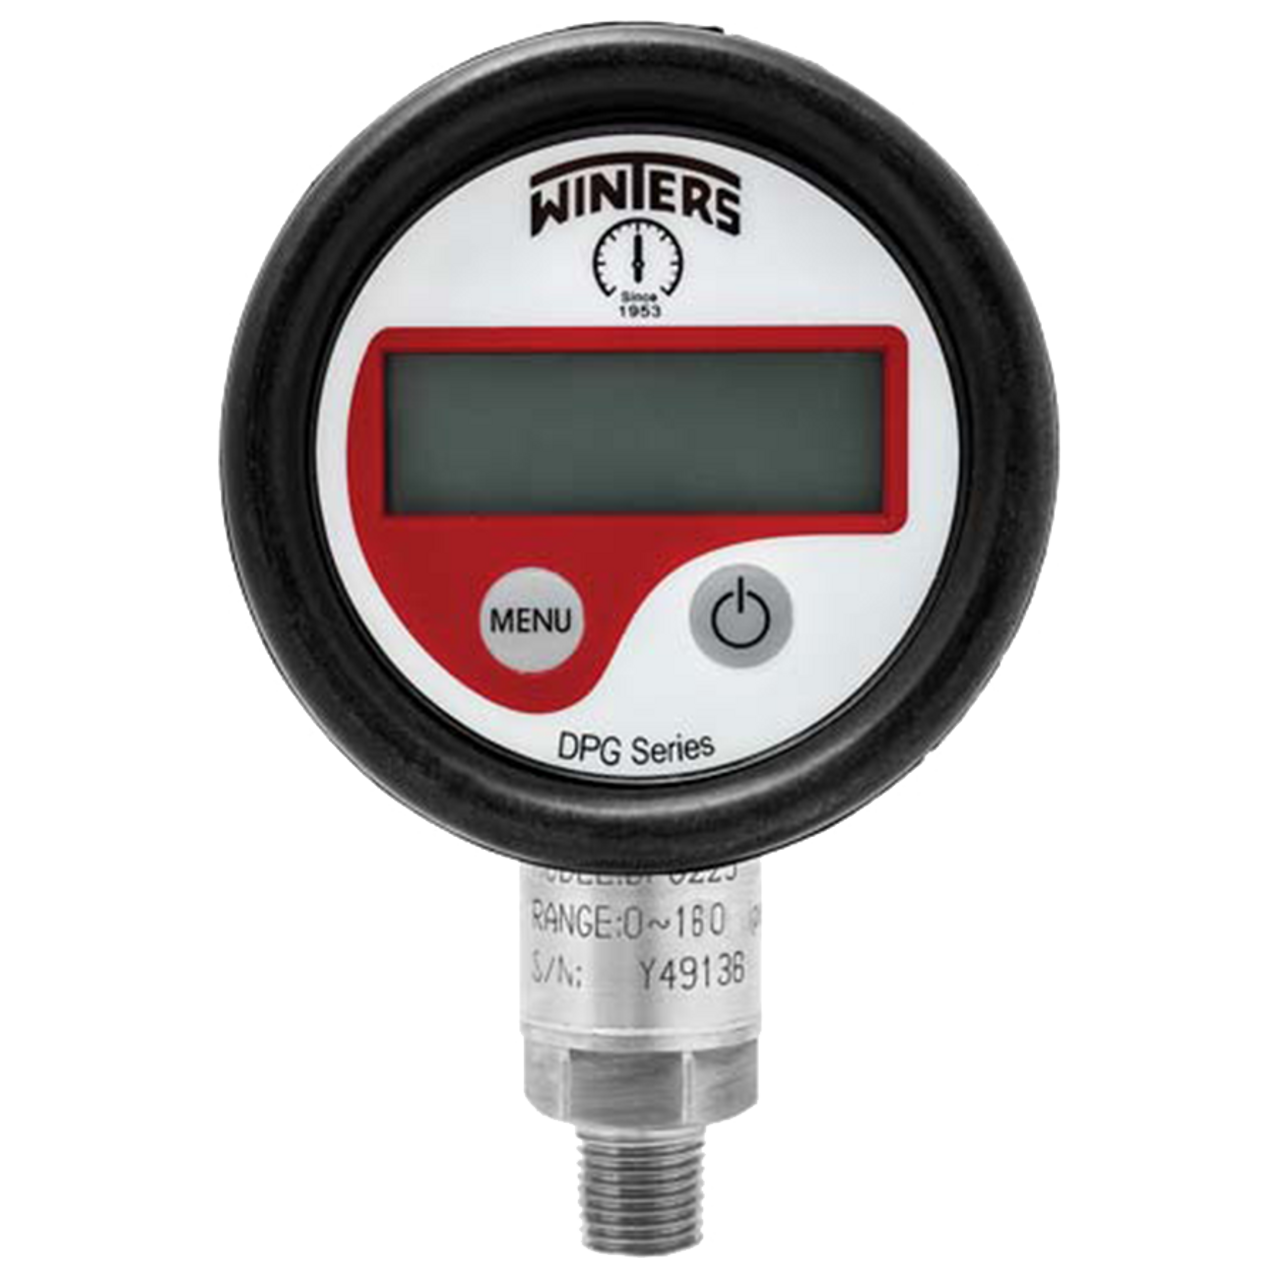 0-600 PSI  - 2-1/2" Digital LCD - Rubberized ABS Case - Stainless Stem Mount - Pressure Gauge  PG-600DS25